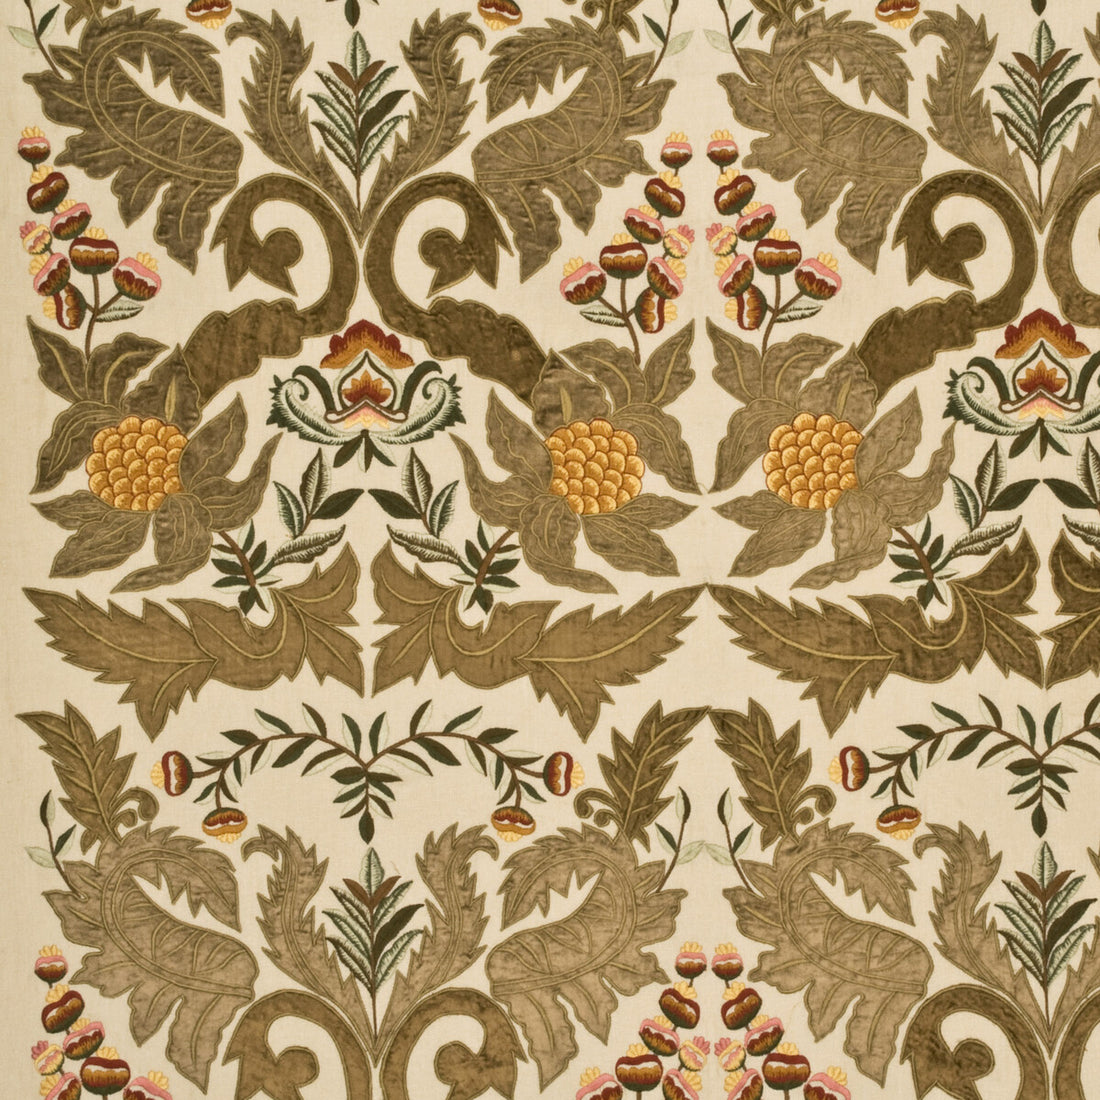 Constantine Linen fabric in sage/gold color - pattern FD689.S118.0 - by Mulberry in the Grandiflora II collection